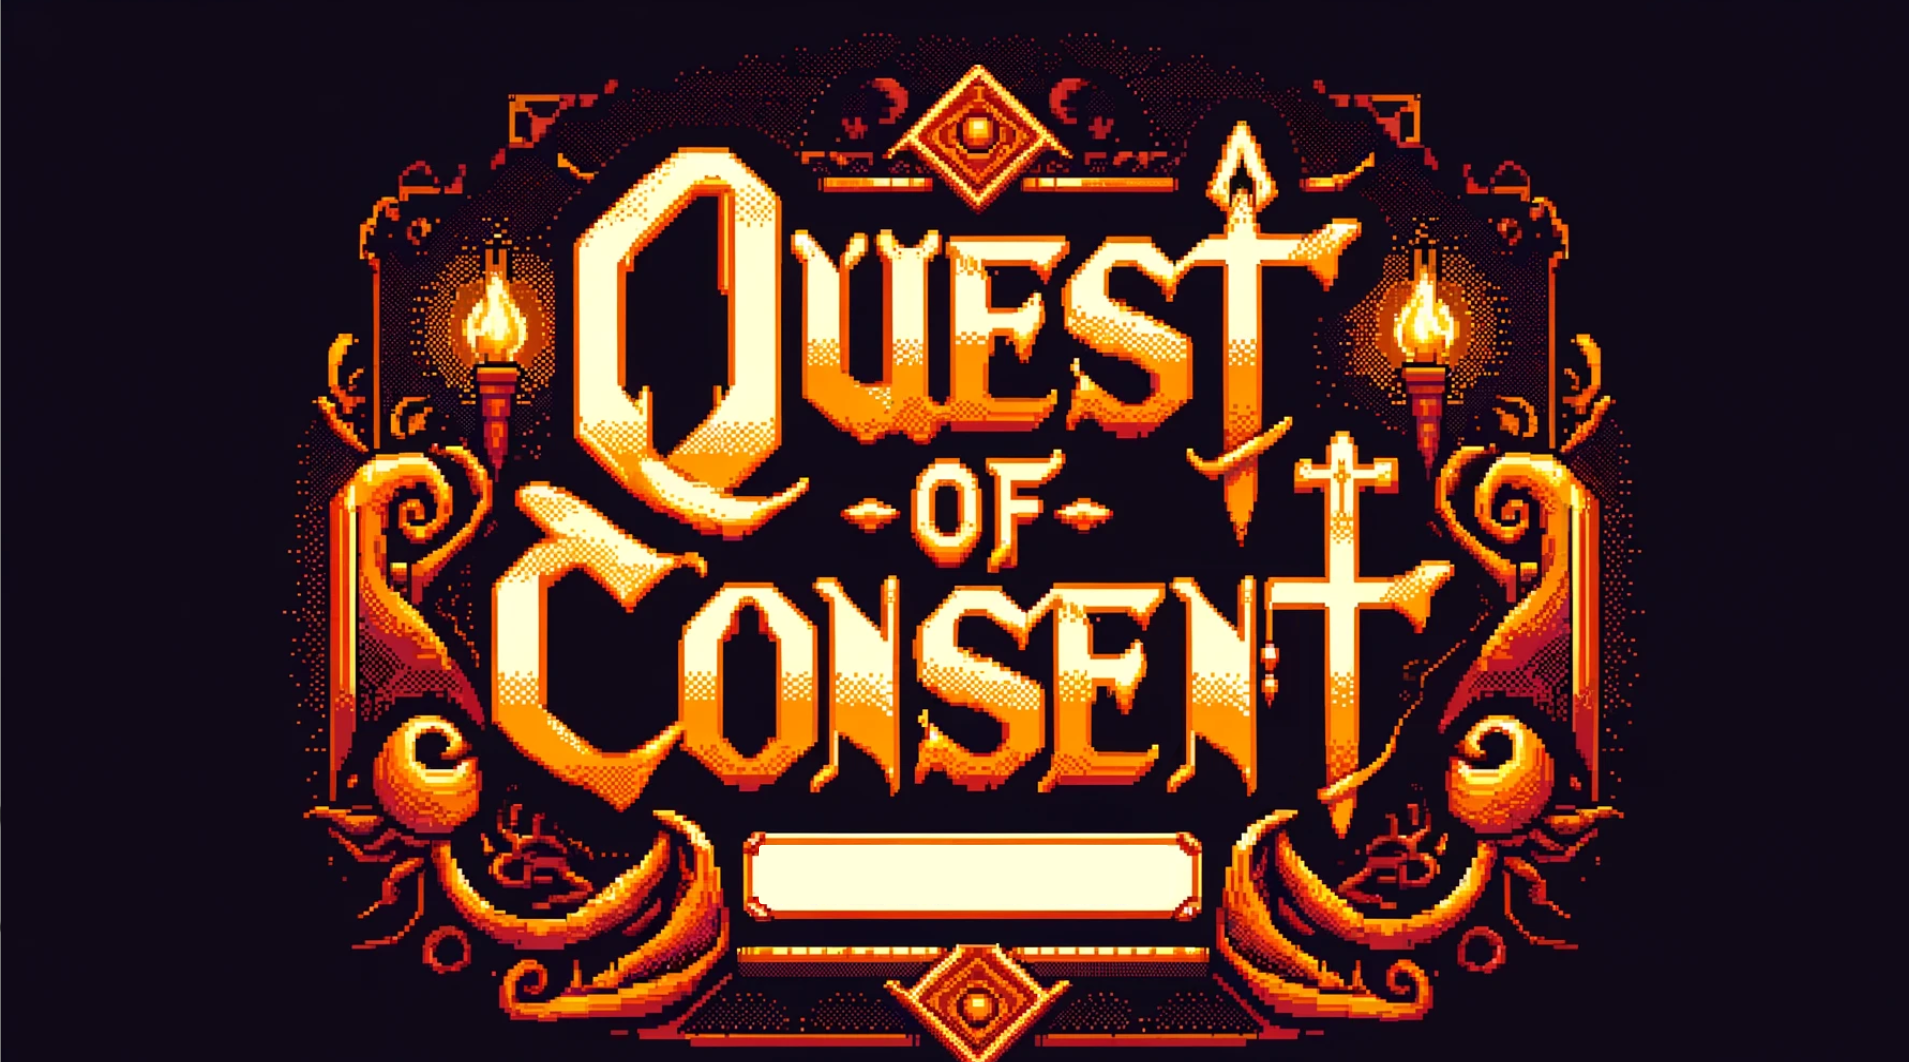 Quest Of Consent